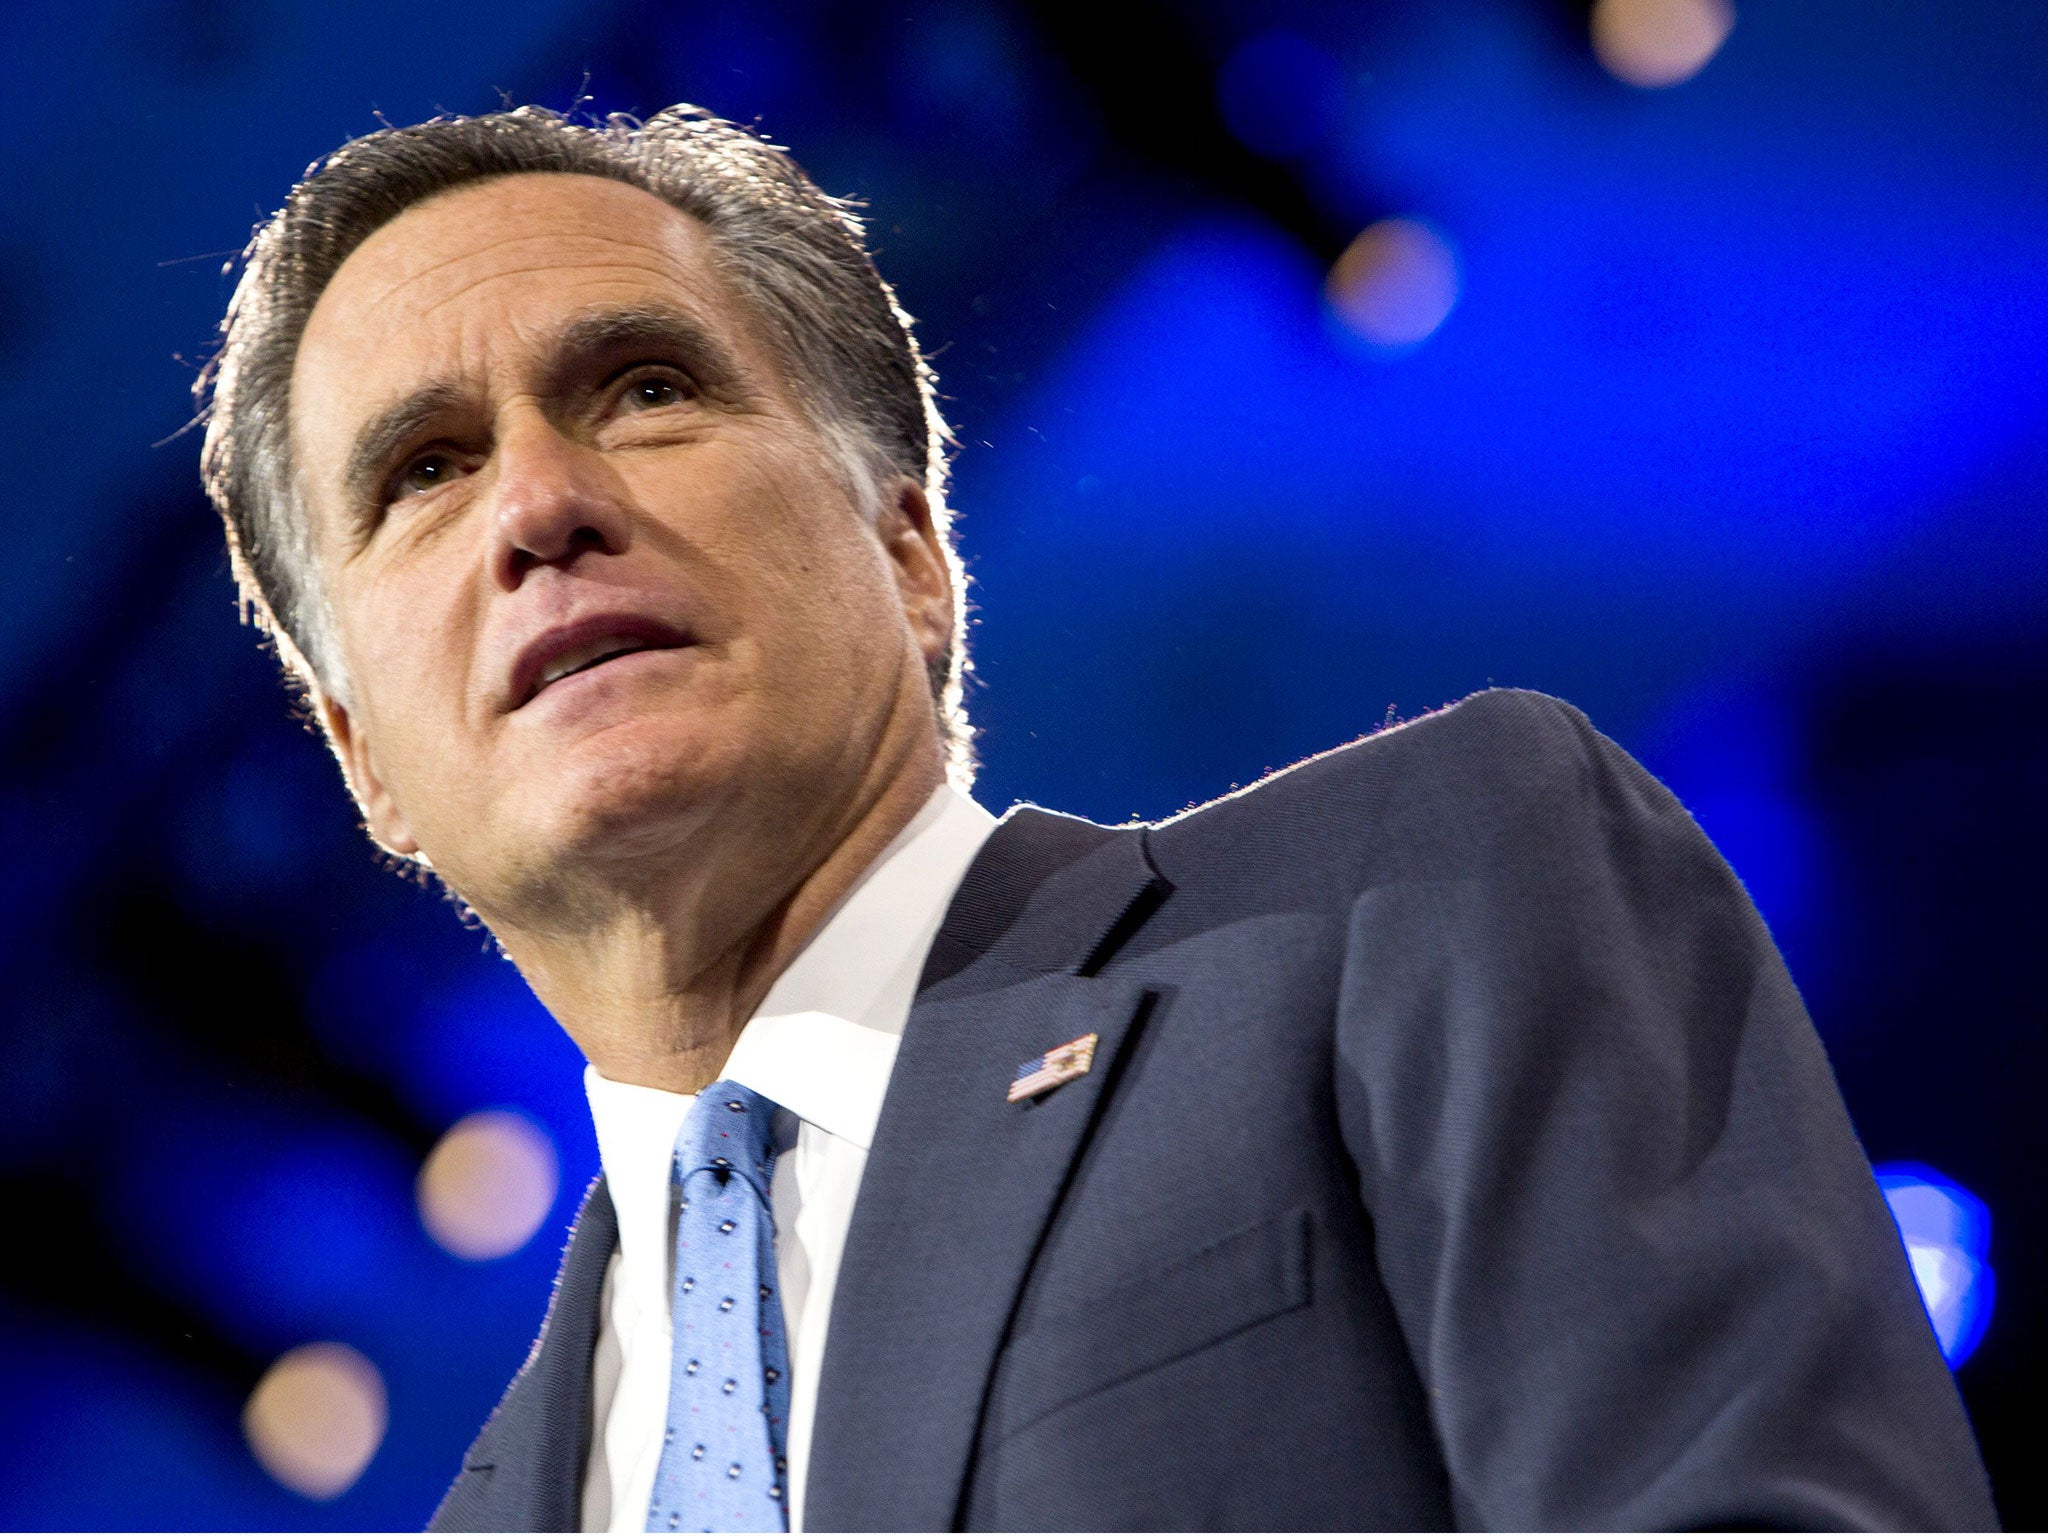 Mr Romney has been a vocal critic of the President in the past